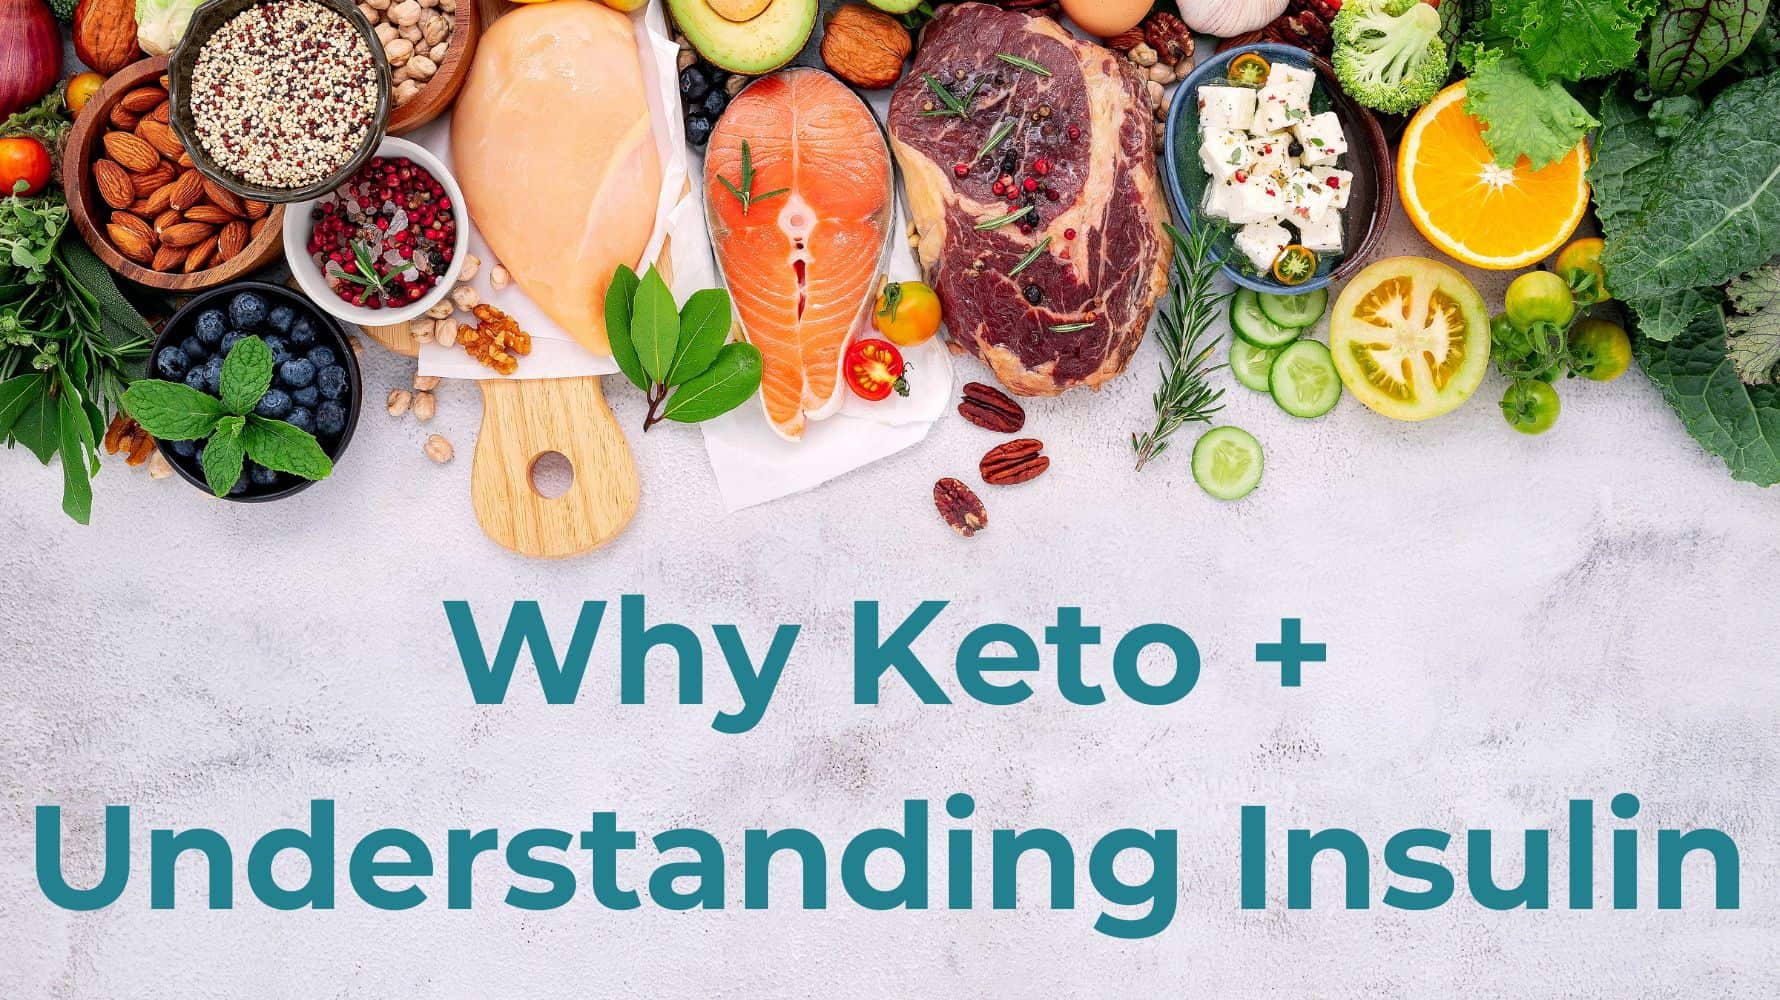 text that says "Why Keto + Understanding Insulin"